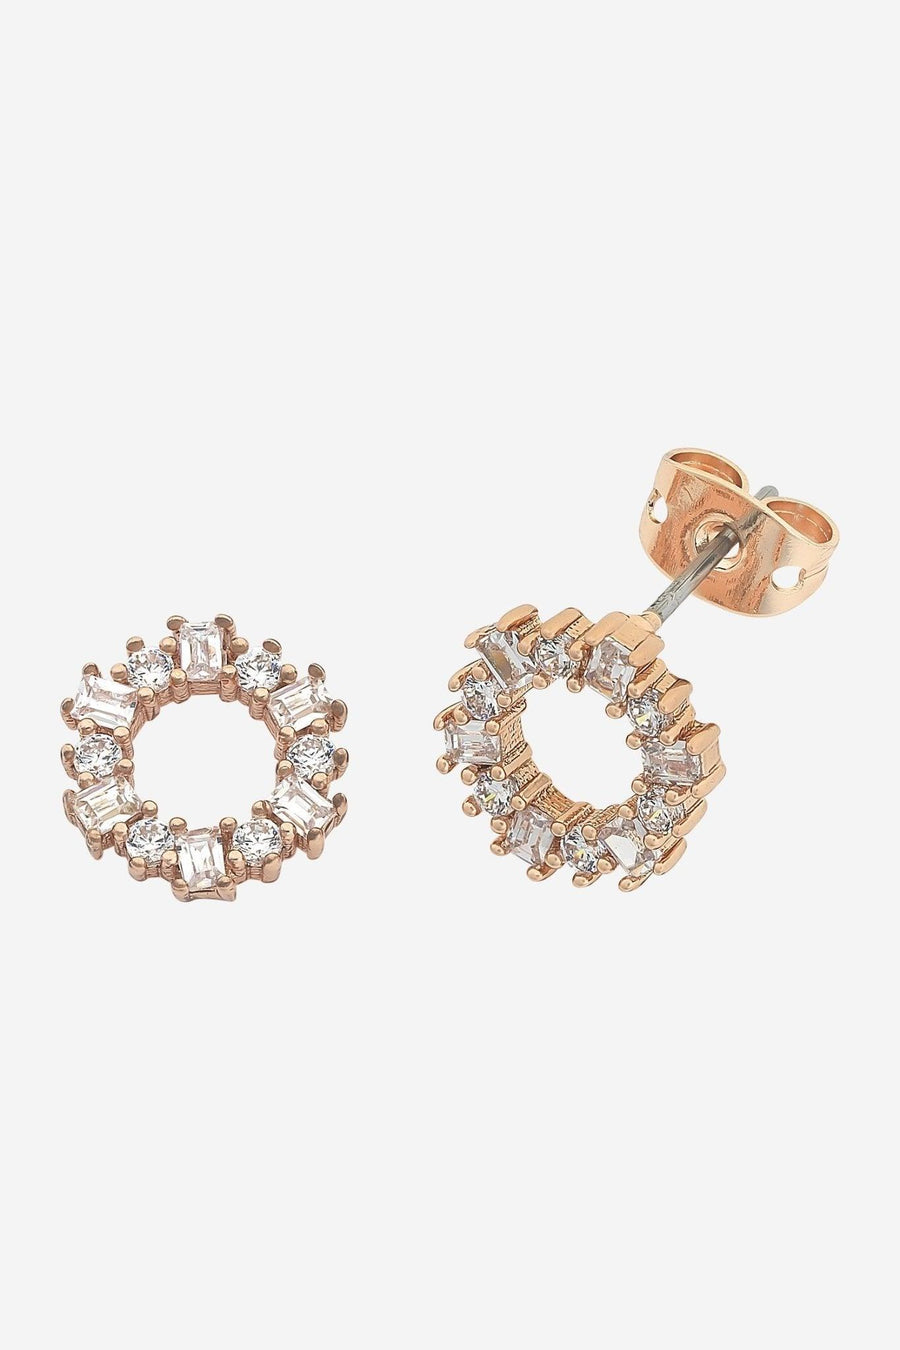 Shop Anna Earrings - At Kohl and Soda | Ready To Ship!